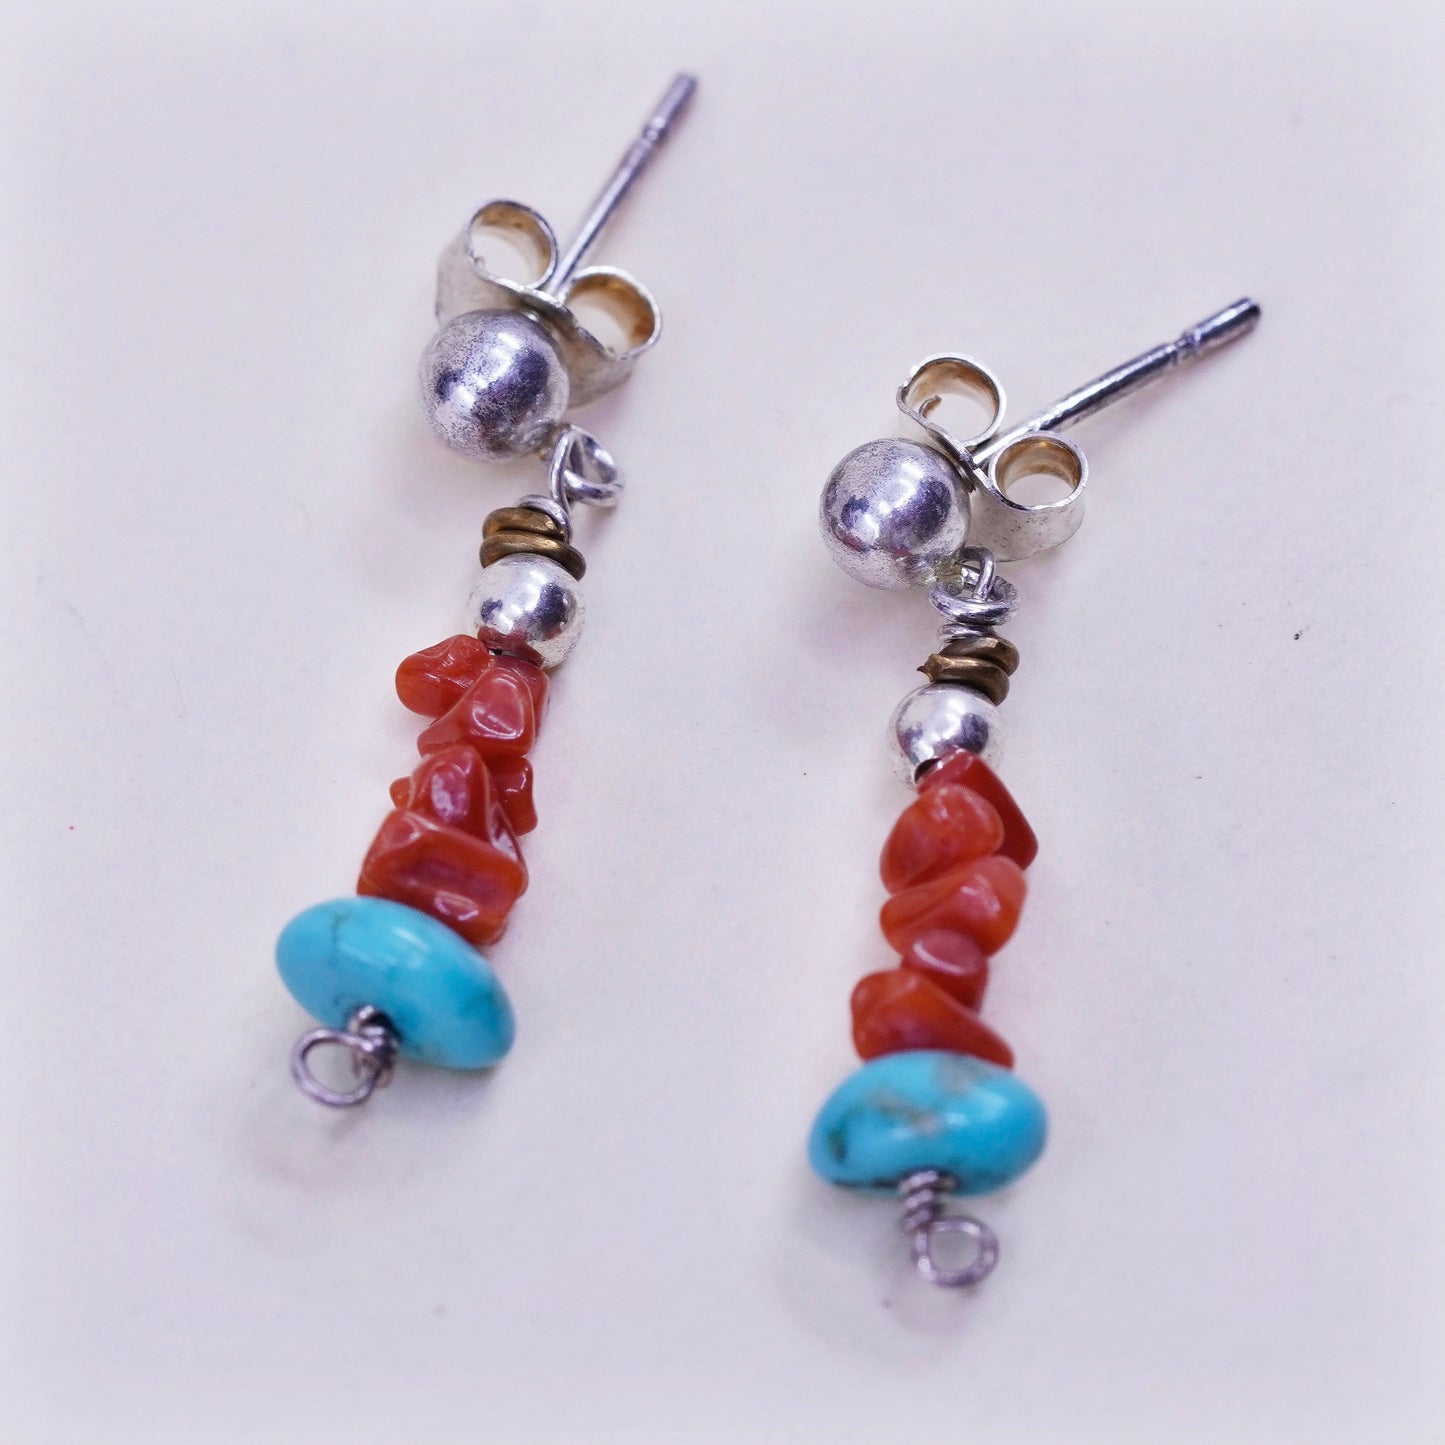 Vintage Sterling 925 silver handmade earrings with turquoise and coral beads